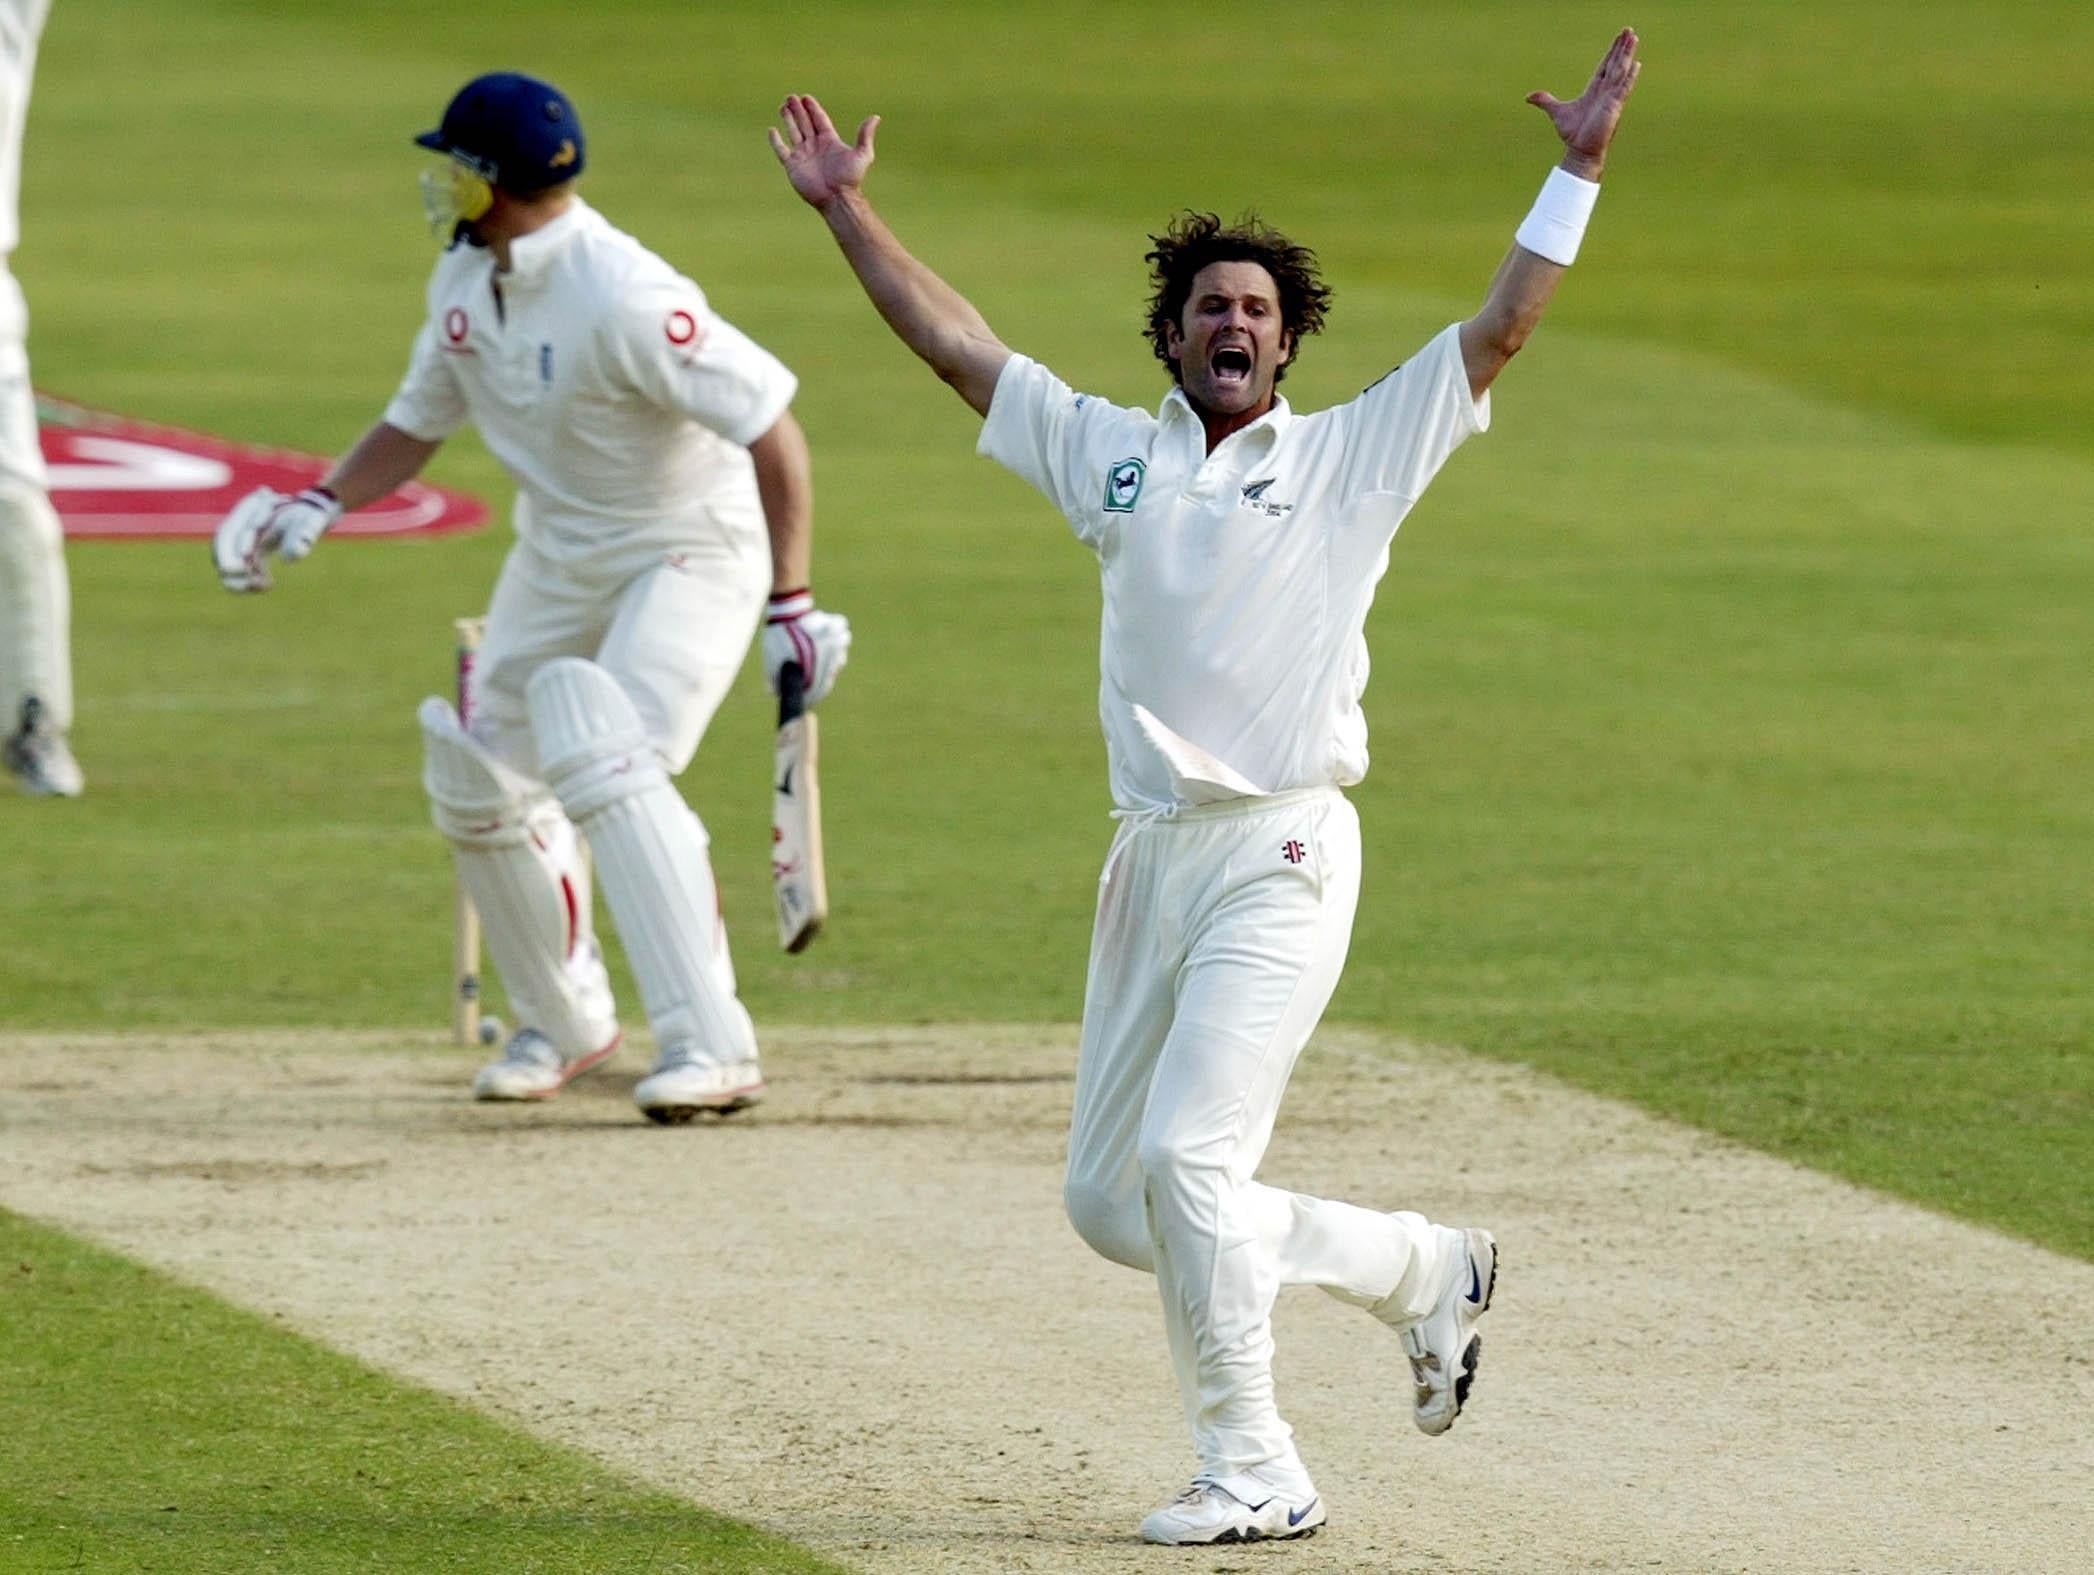 New Zealand’s Chris Cairns is recovering from a spinal stroke (David Davies/PA)